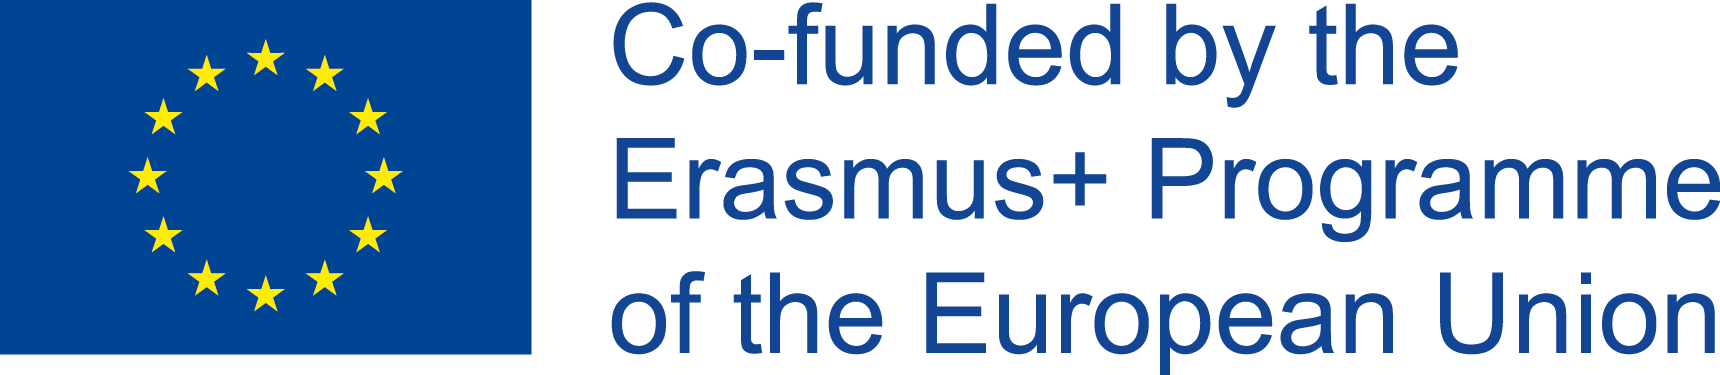 Funded by the Erasmus + program of the European Union